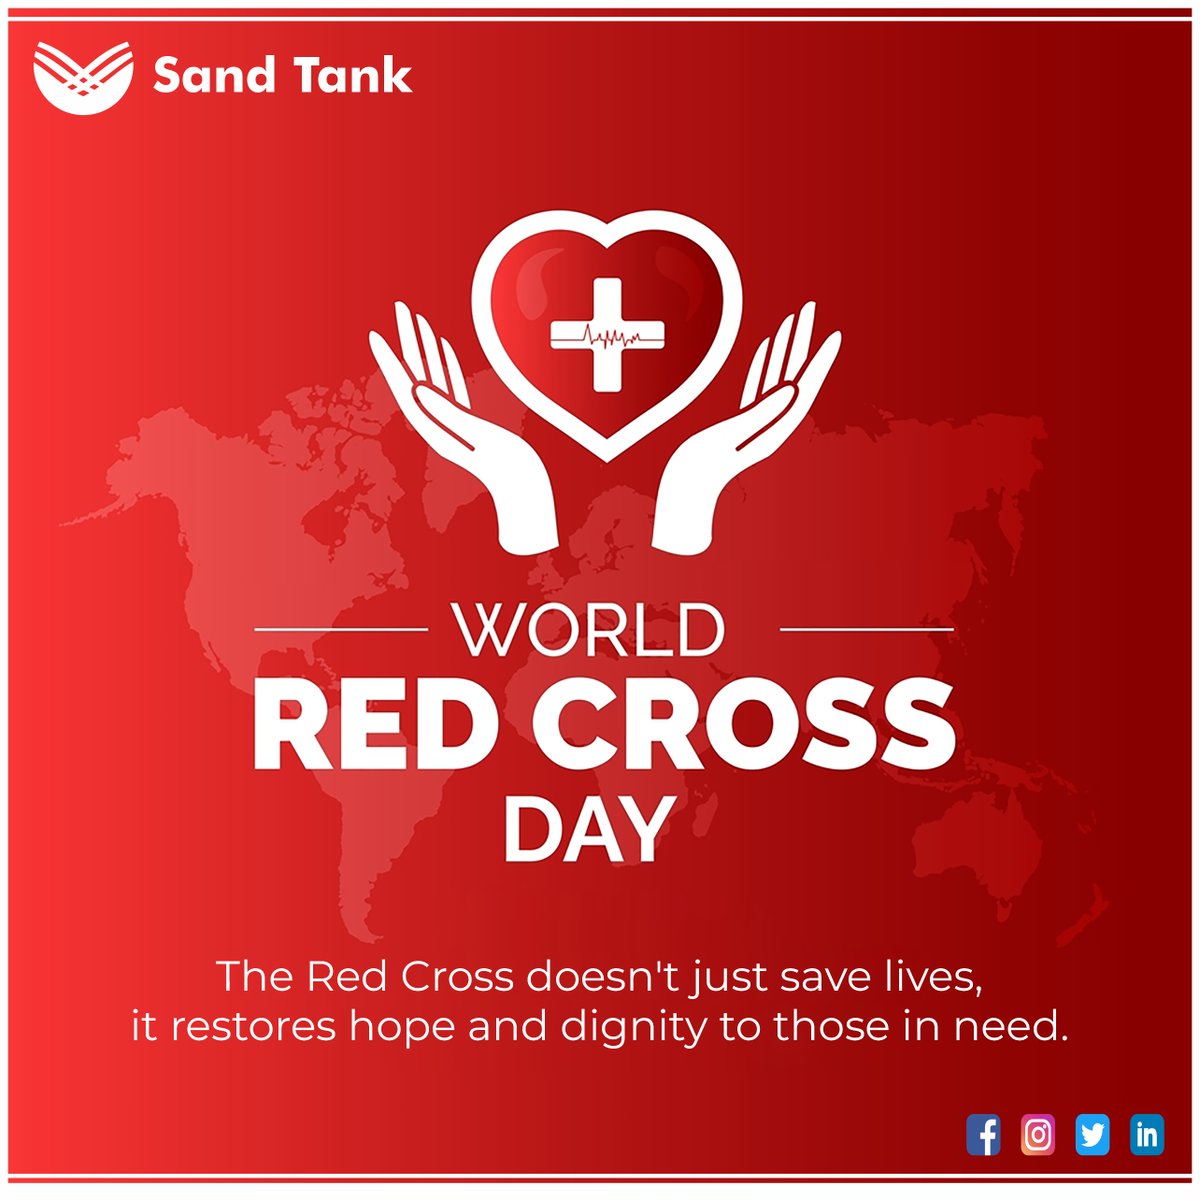 Today, we celebrate the spirit of humanity and service embodied by the Red Cross. Let's honor their legacy of compassion and resilience on #WorldRedCrossDay and every day. 🎈❤

#Sandtankfoundation #RedCrossDay #RedCrossHeroes #GlobalSolidarity #SupportRedCross